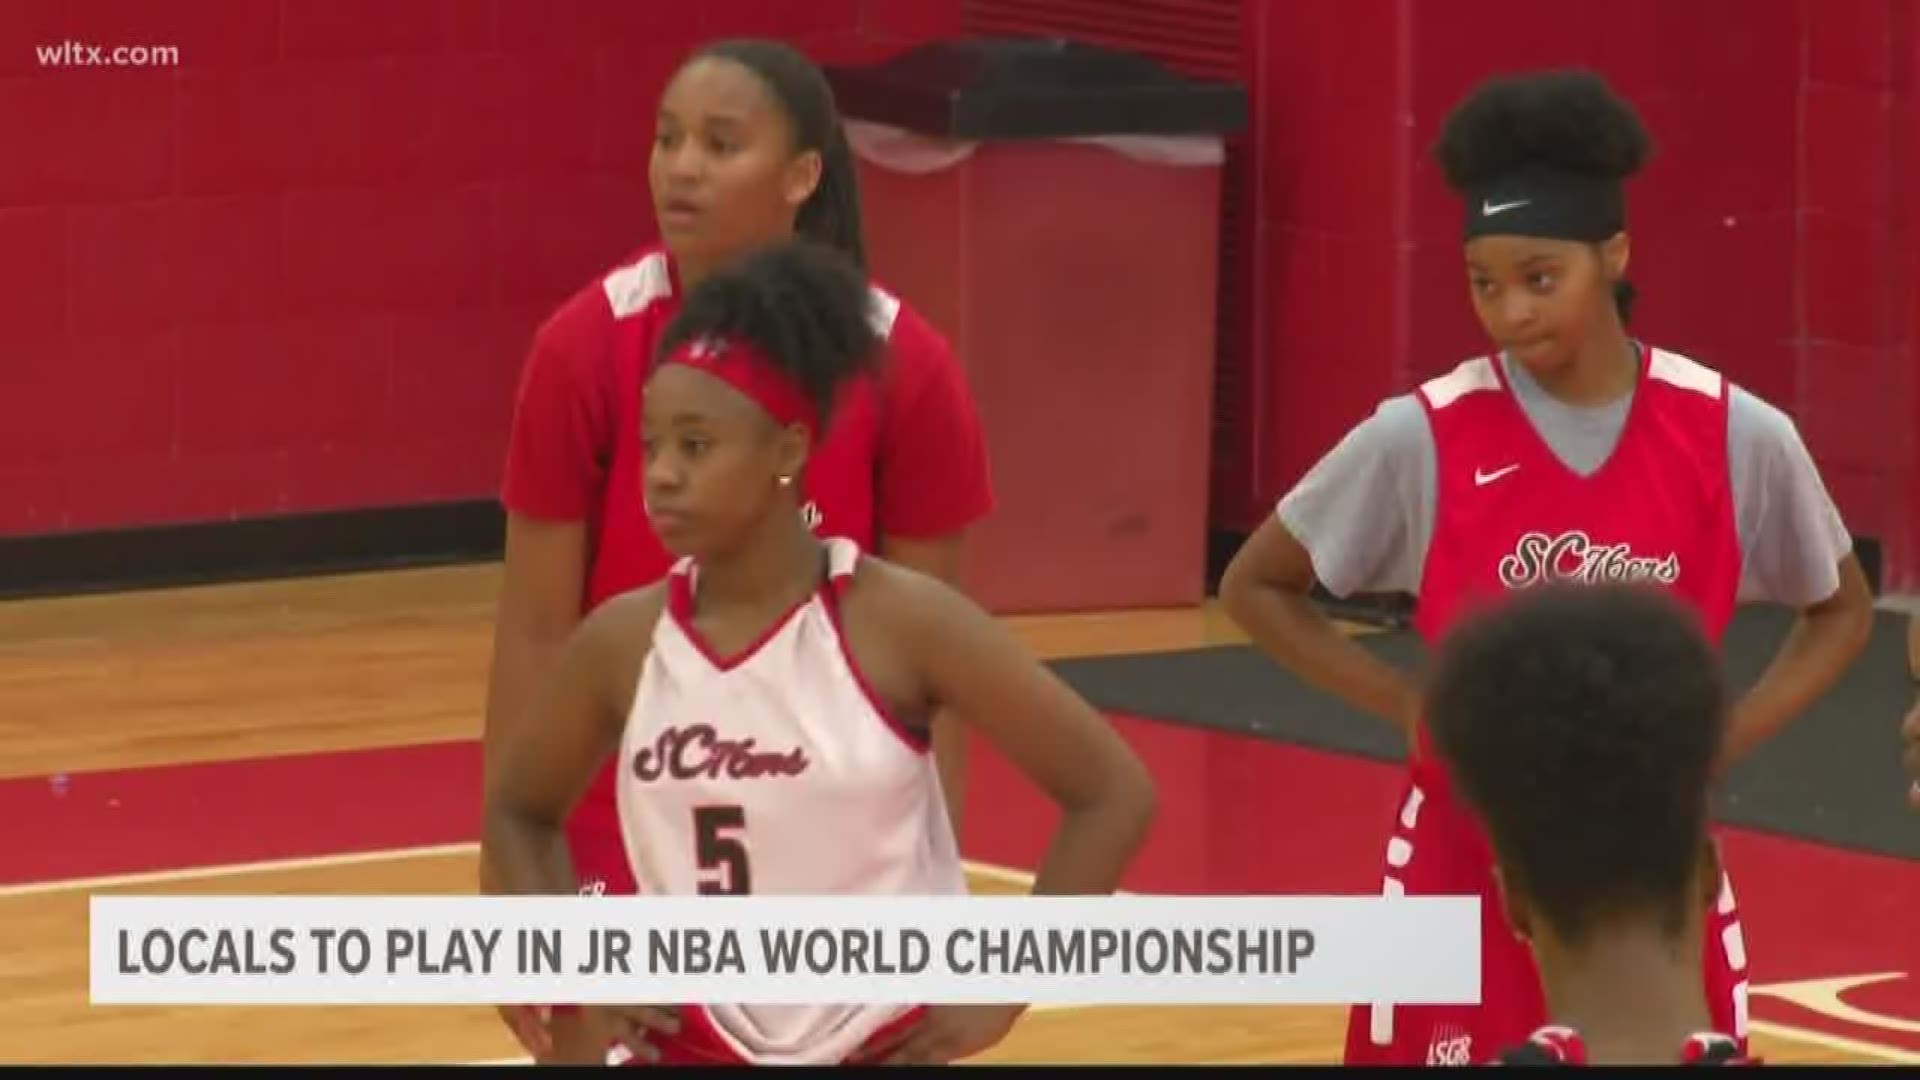 A local AAU girls team will have the chance to compete for a world championship in the first JR NBA World Championship Tournament in Orlando. The team has some of the best players from the Midlands and the Southeast.